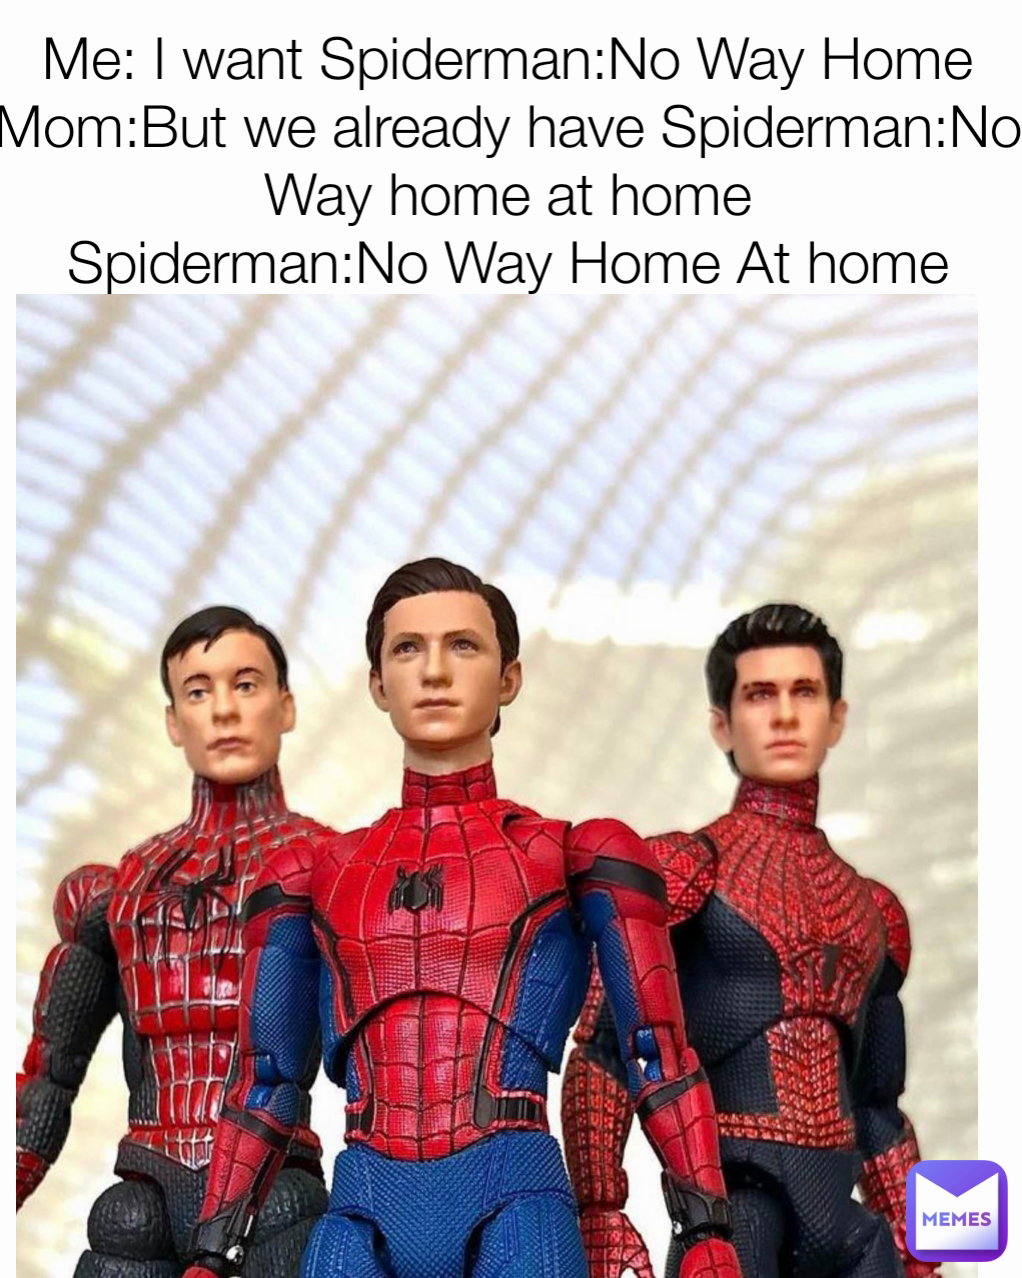 Me: I want Spiderman:No Way Home
Mom:But we already have Spiderman:No Way home at home
Spiderman:No Way Home At home